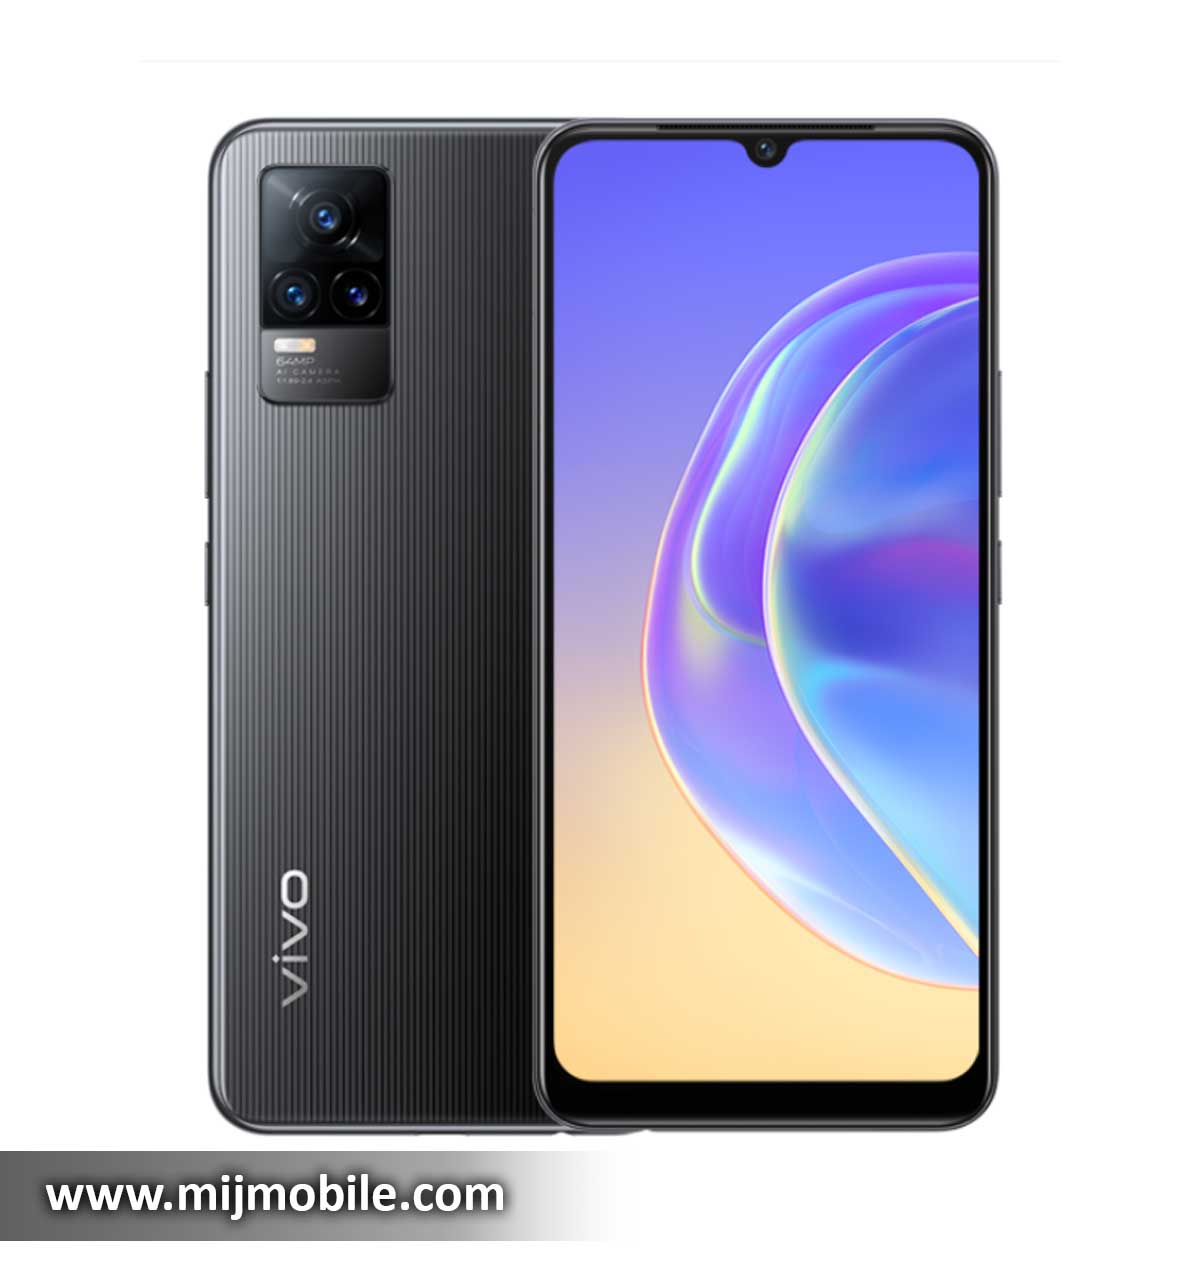 Vivo Y73 Price in Pakistan & Specifications Vivo Y73 Price in Pakistan is only 43,999.